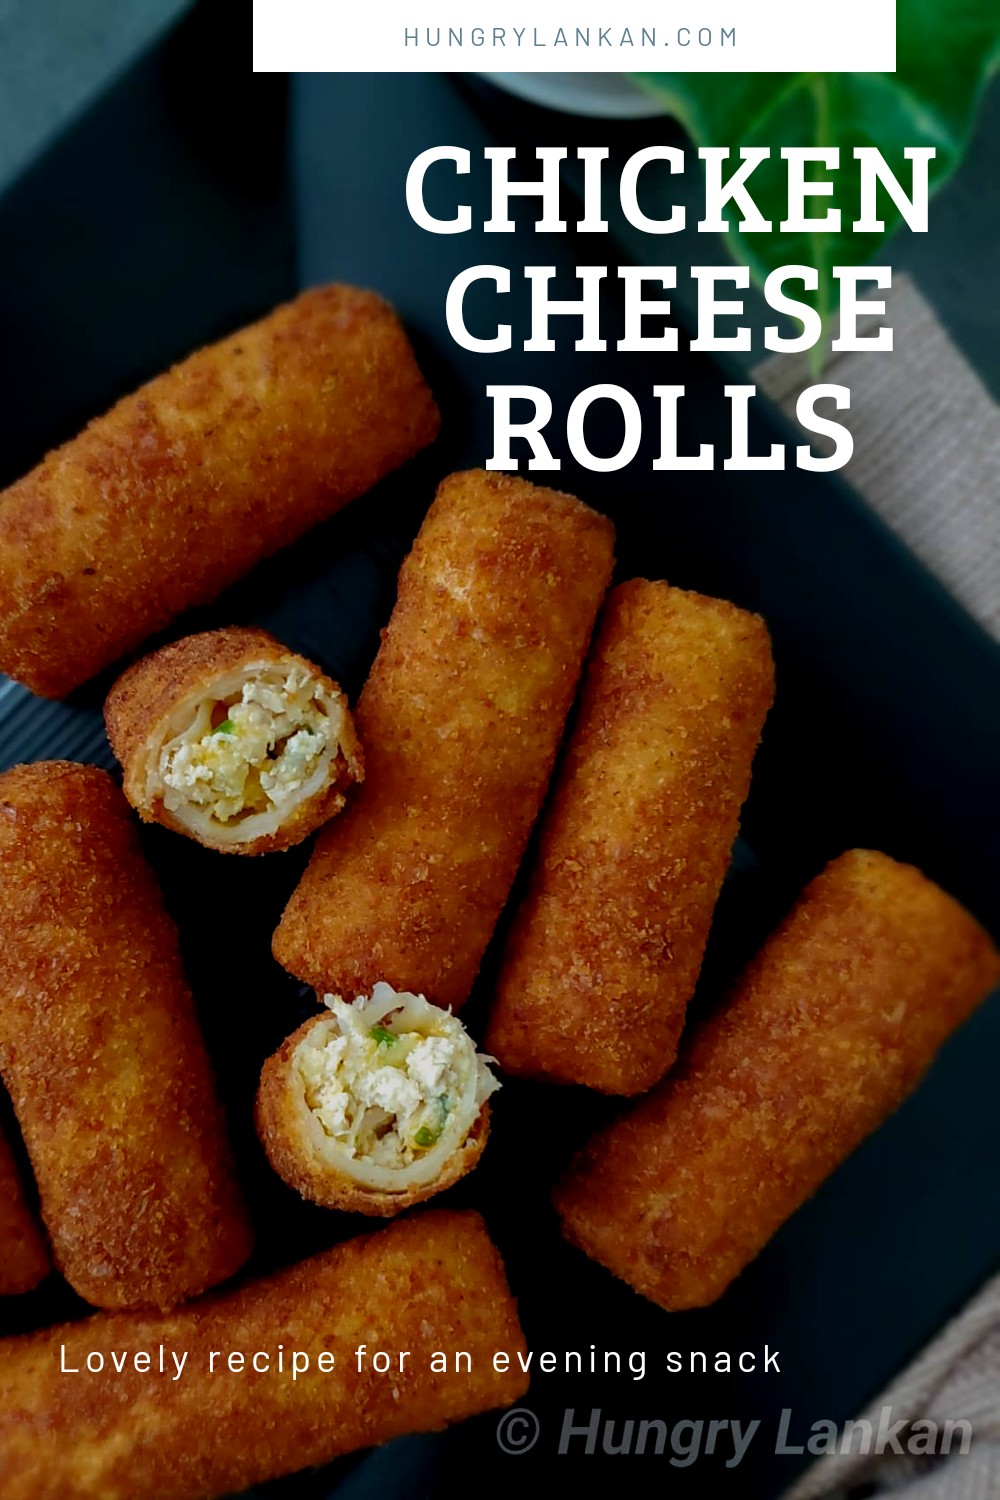 Crispy Chicken rolls with Habanero and cheese - Hungry Lankan